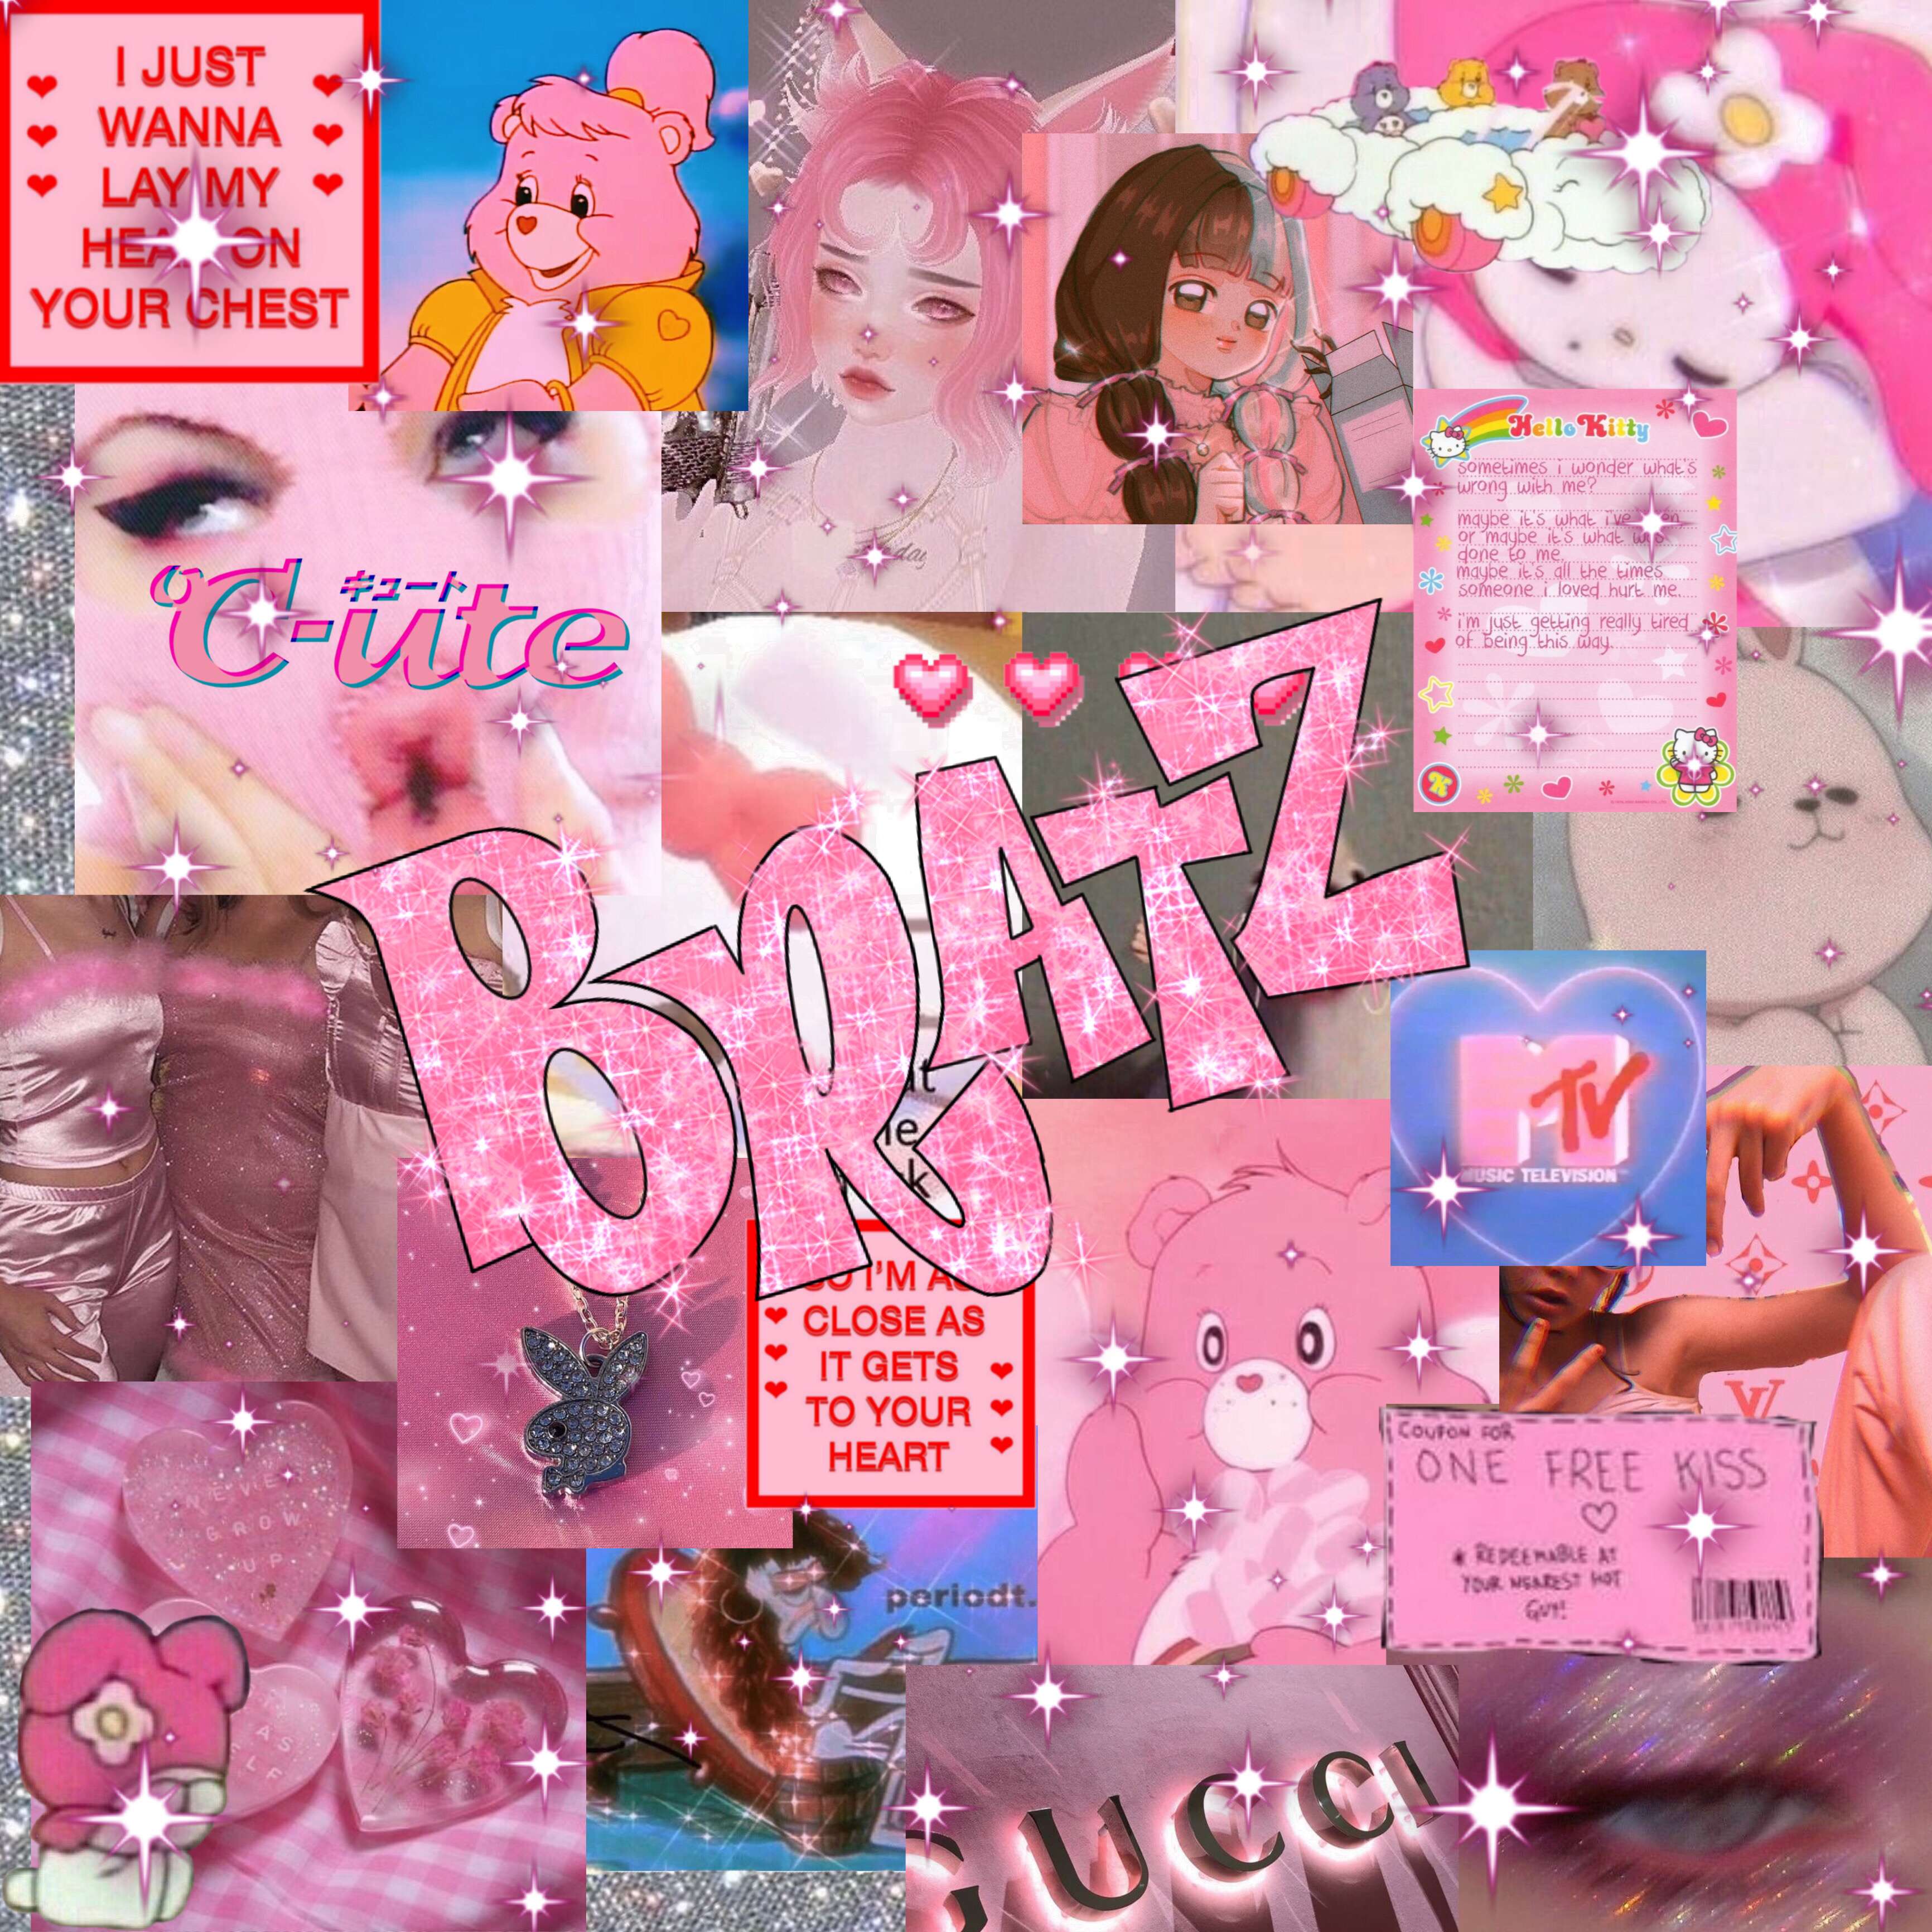 Roblox Barbz Pfp Use This Free 2048x1152 Banner Maker To Crop Your Image Or Photo To The Best Dimensions For A Desktop Wallpaper Or Social Media Banners Your guardian angels will be giving you tips and tricks to make. roblox barbz pfp use this free 2048x1152 banner maker to crop your image or photo to the best dimensions for a desktop wallpaper or social media banners